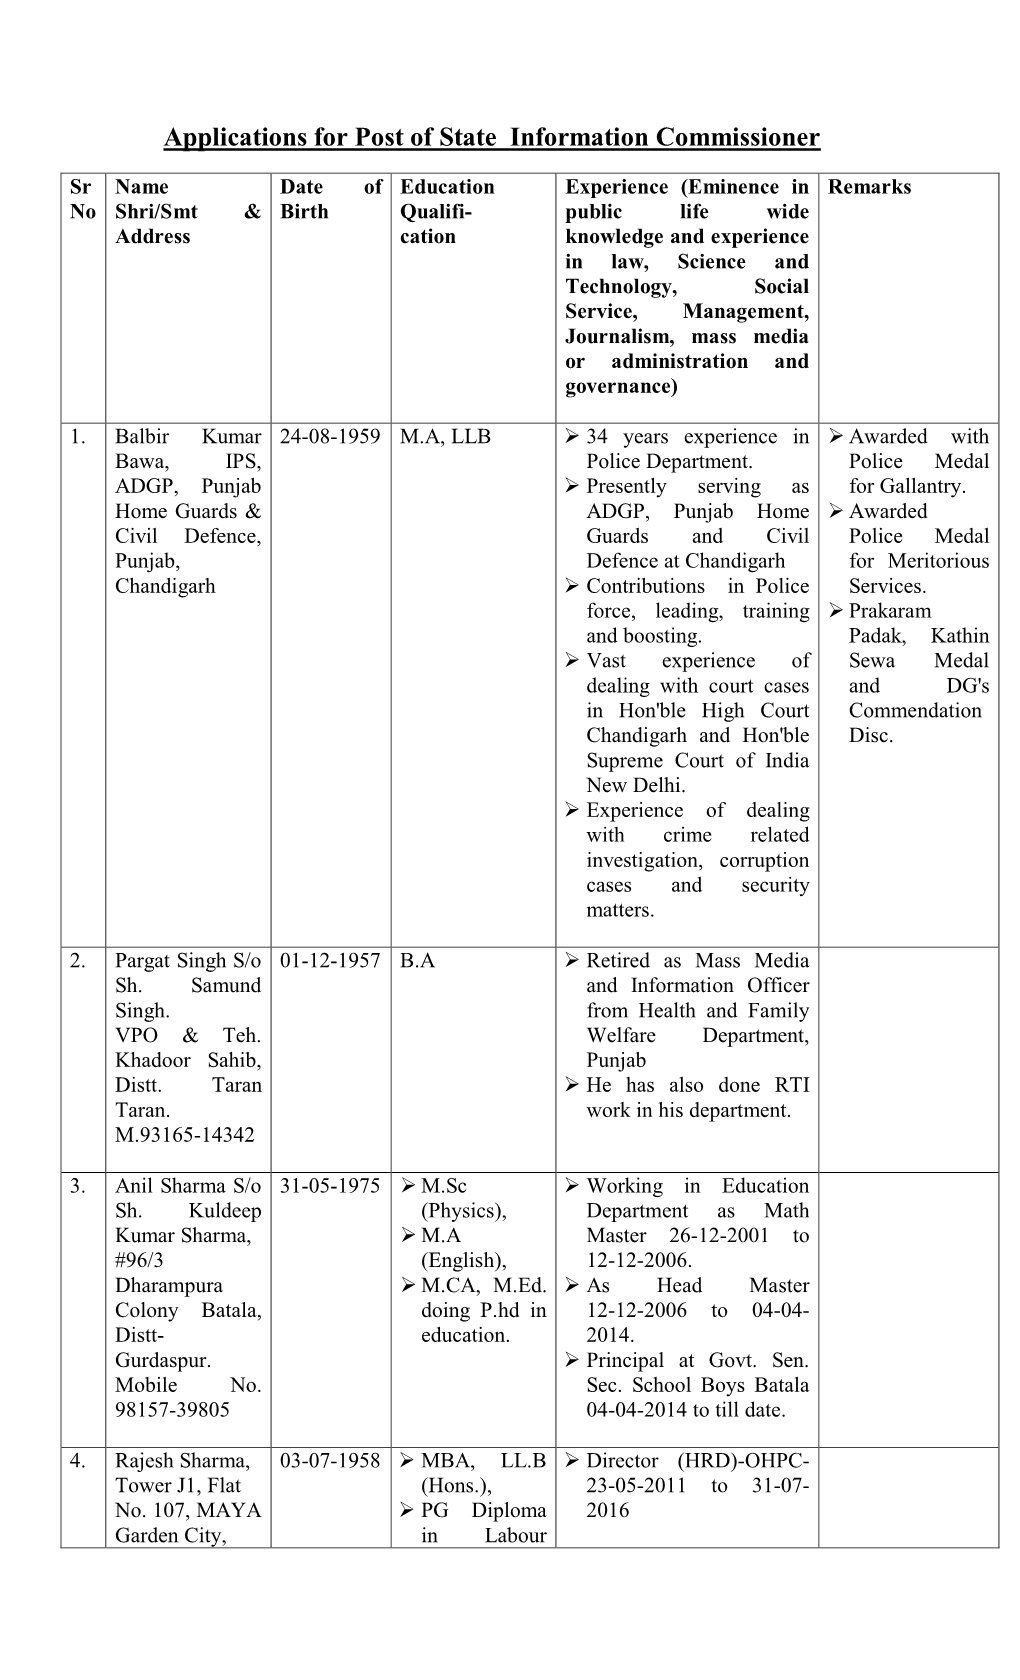 Applications for Post of State Information Commissioner